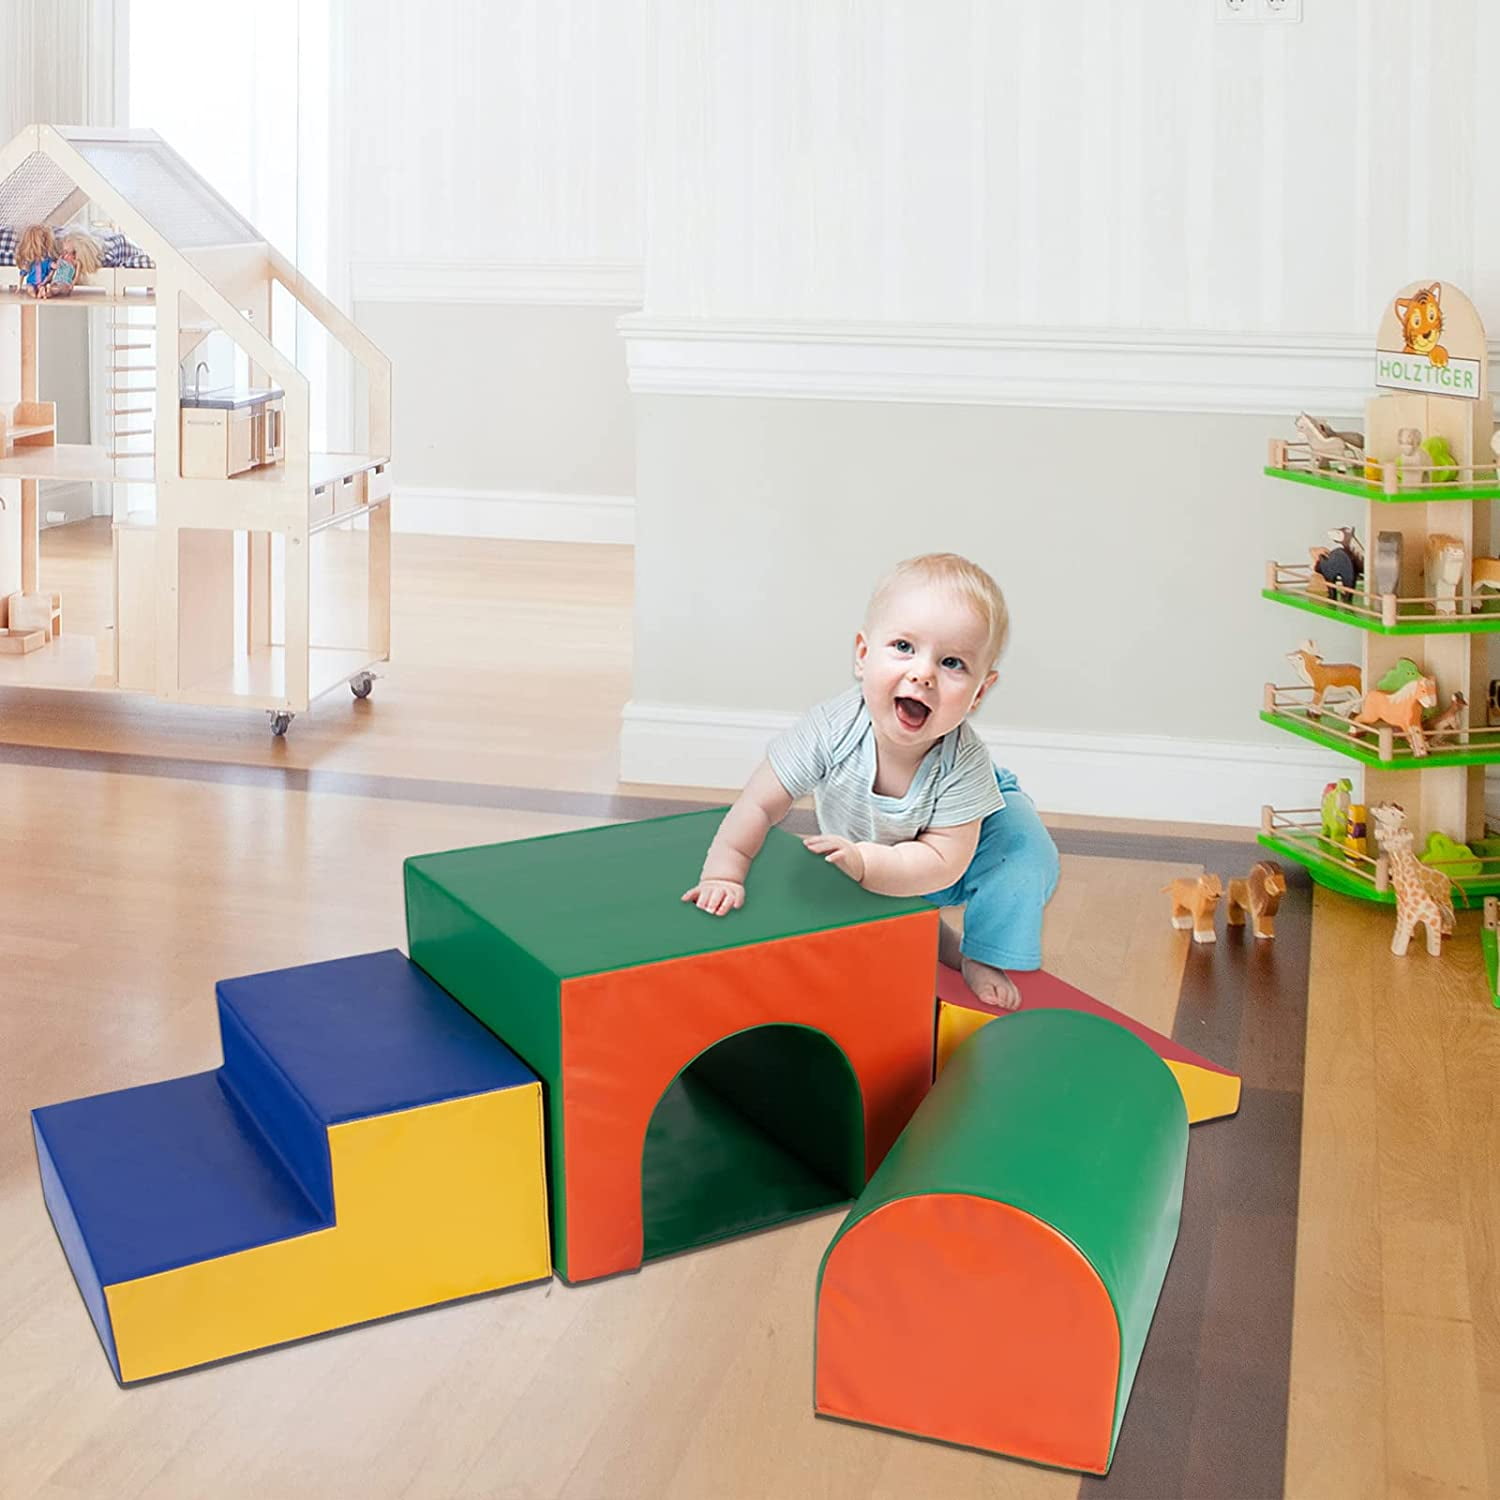 5-Piece Set - Assorted FDP SoftScape Single Tunnel Play Foam Climber Plus Beginner Toddler Soft Structure for Active Playtime 